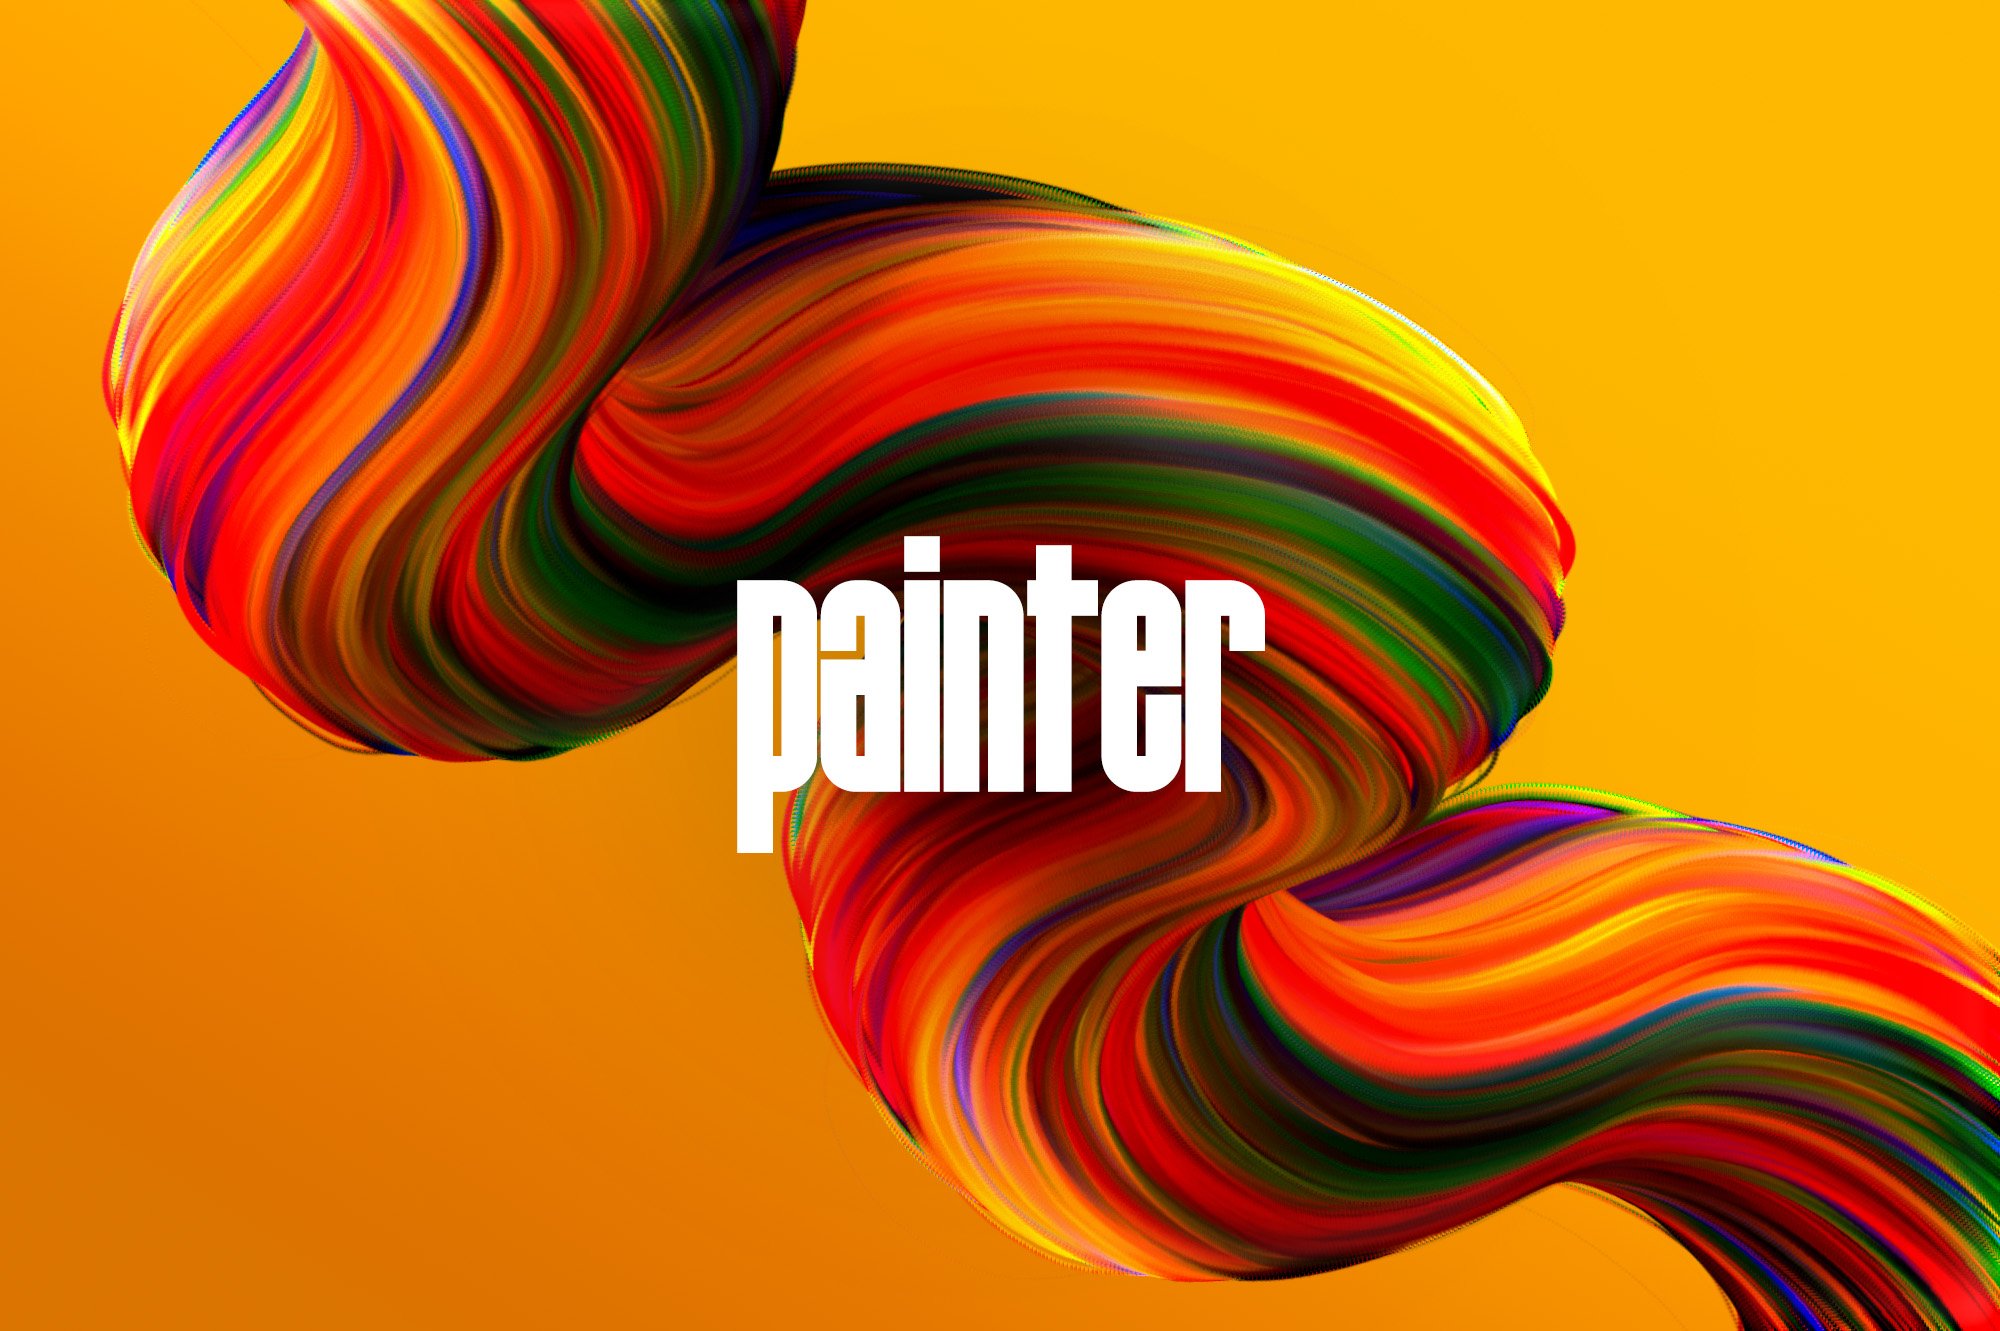 15 painter preview example 03 668